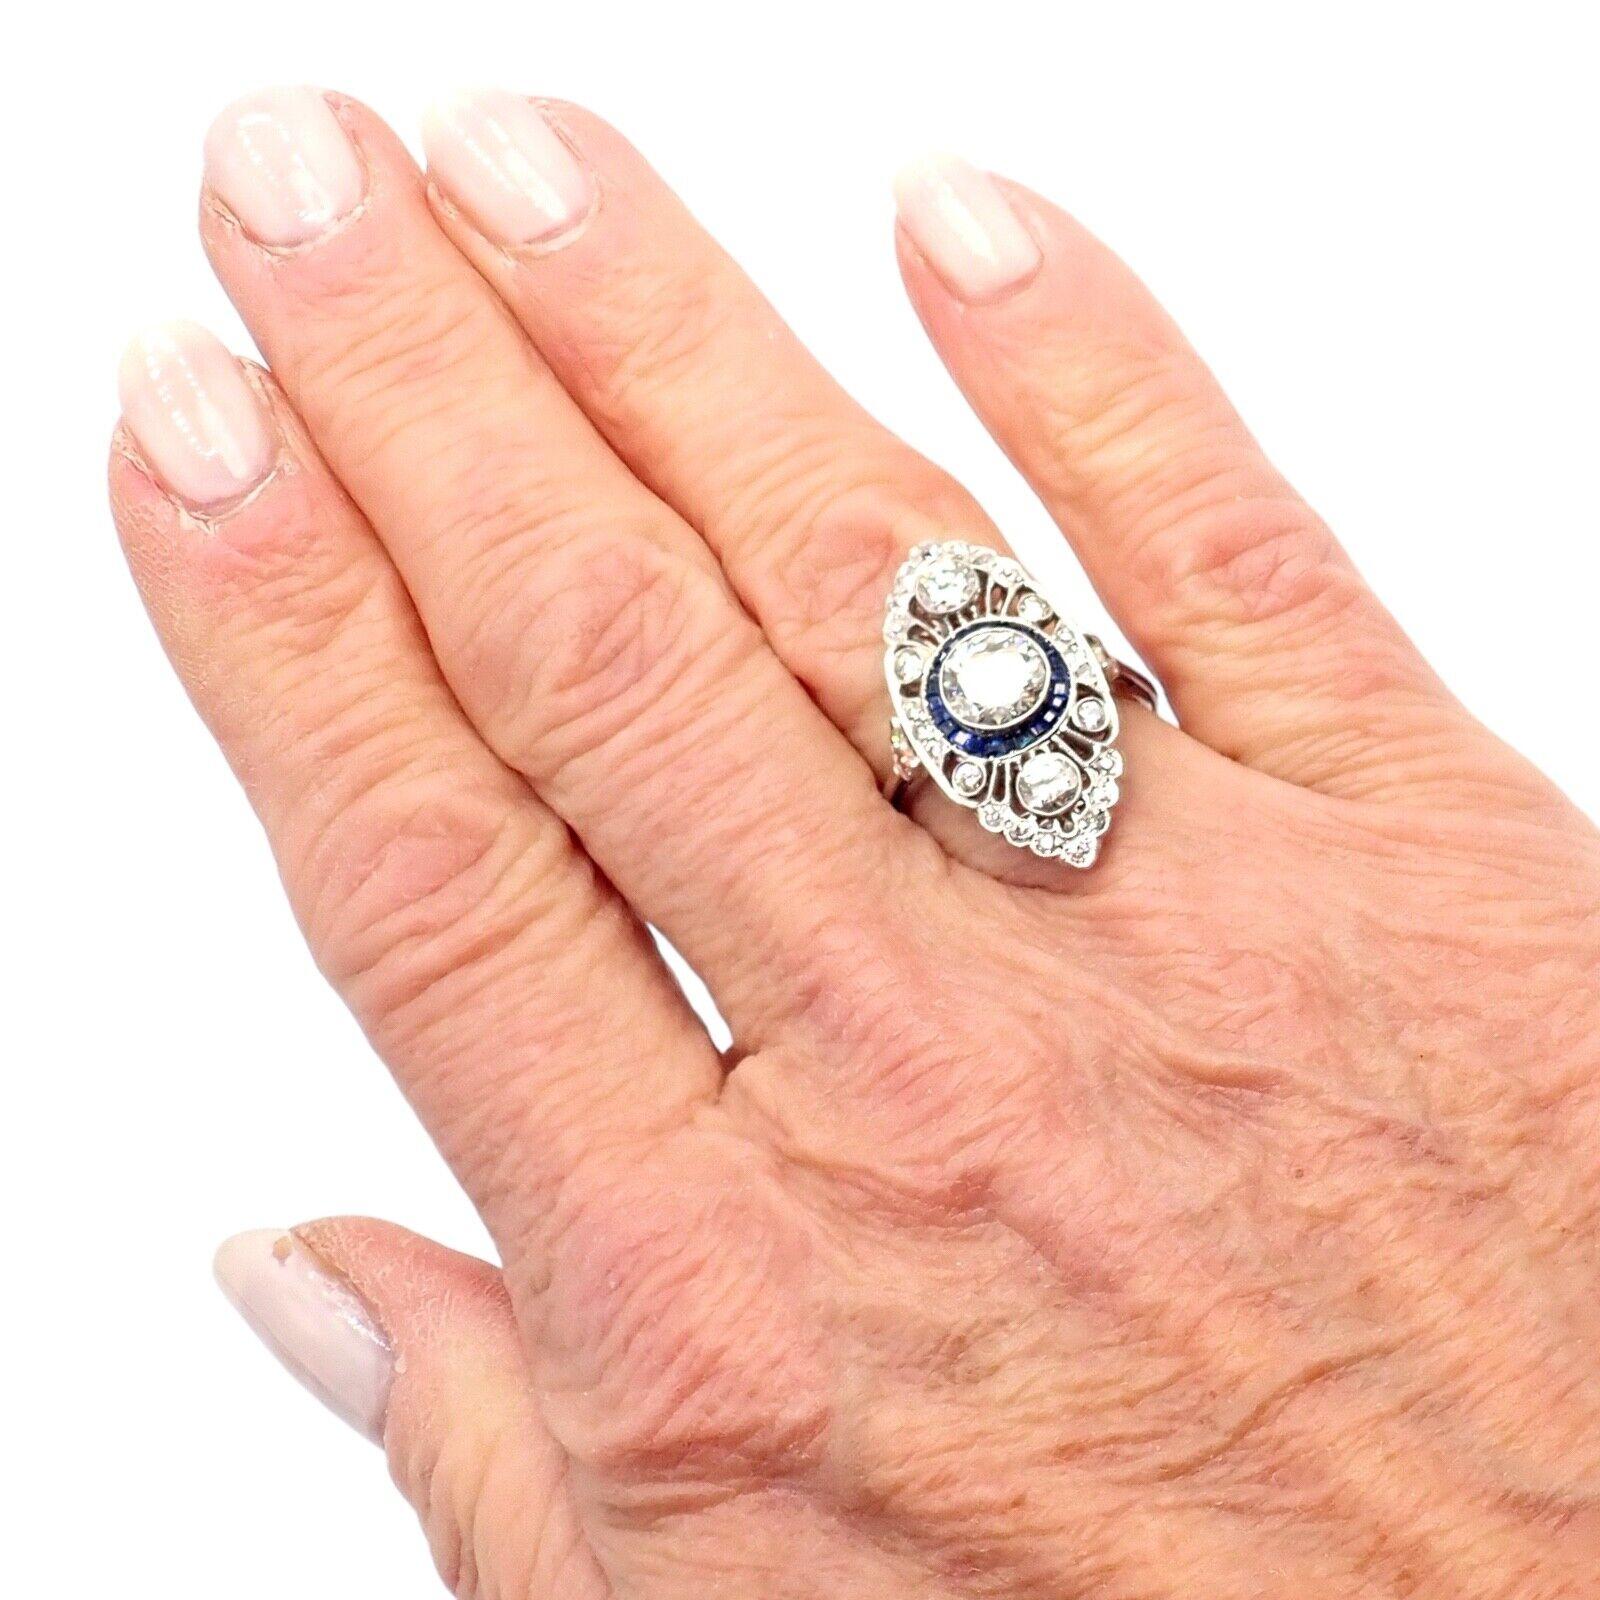 Vintage Estate Art Deco Diamond Filigree Platinum Ring In Excellent Condition For Sale In Holland, PA